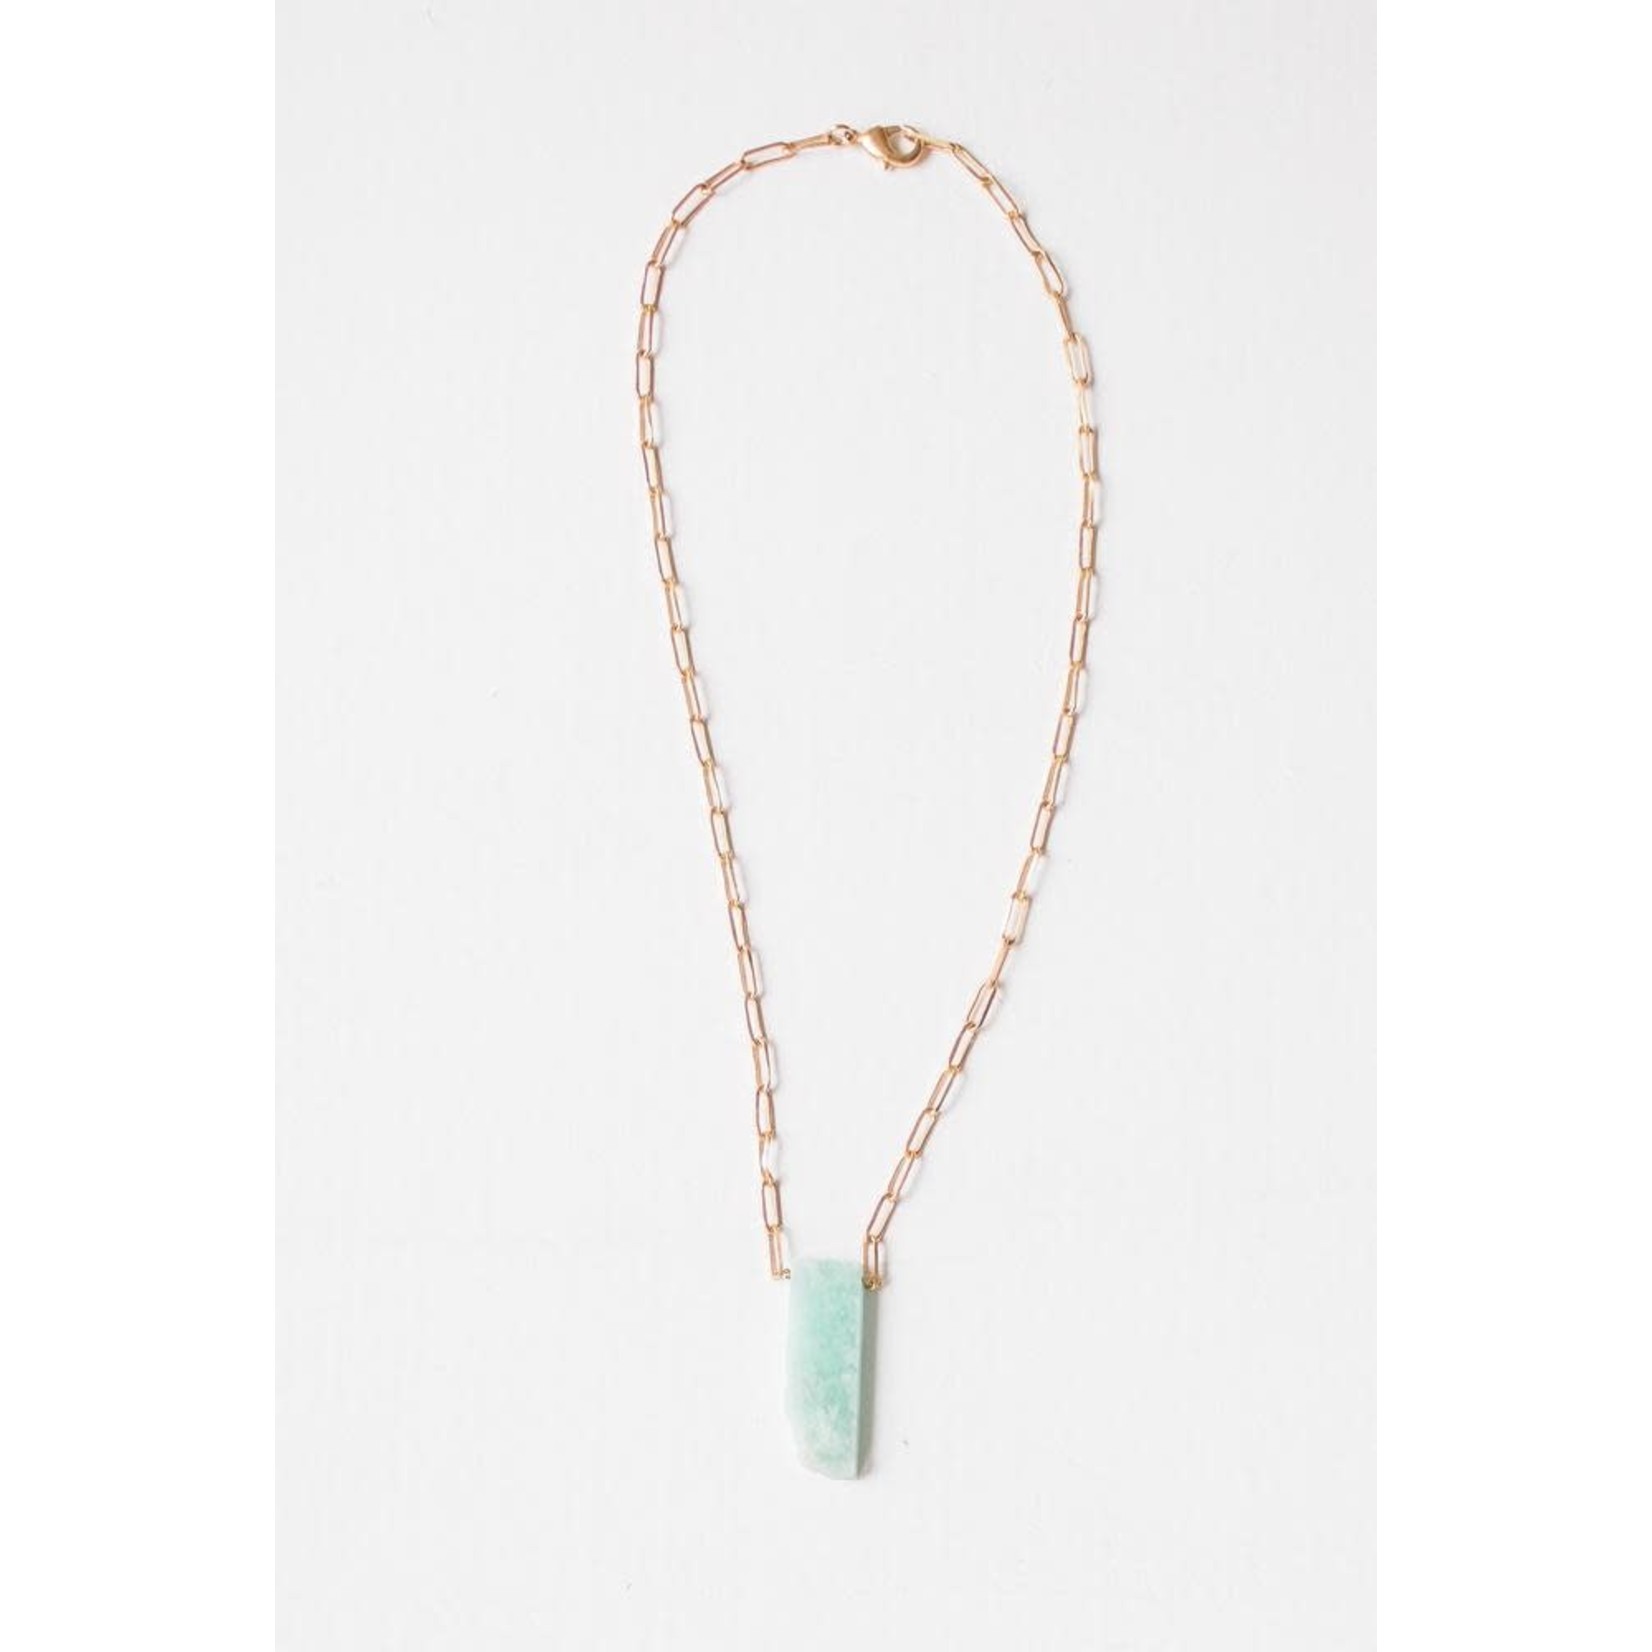 Leslie Curtis Jewelry Designs Charlotte Amazonite Necklace